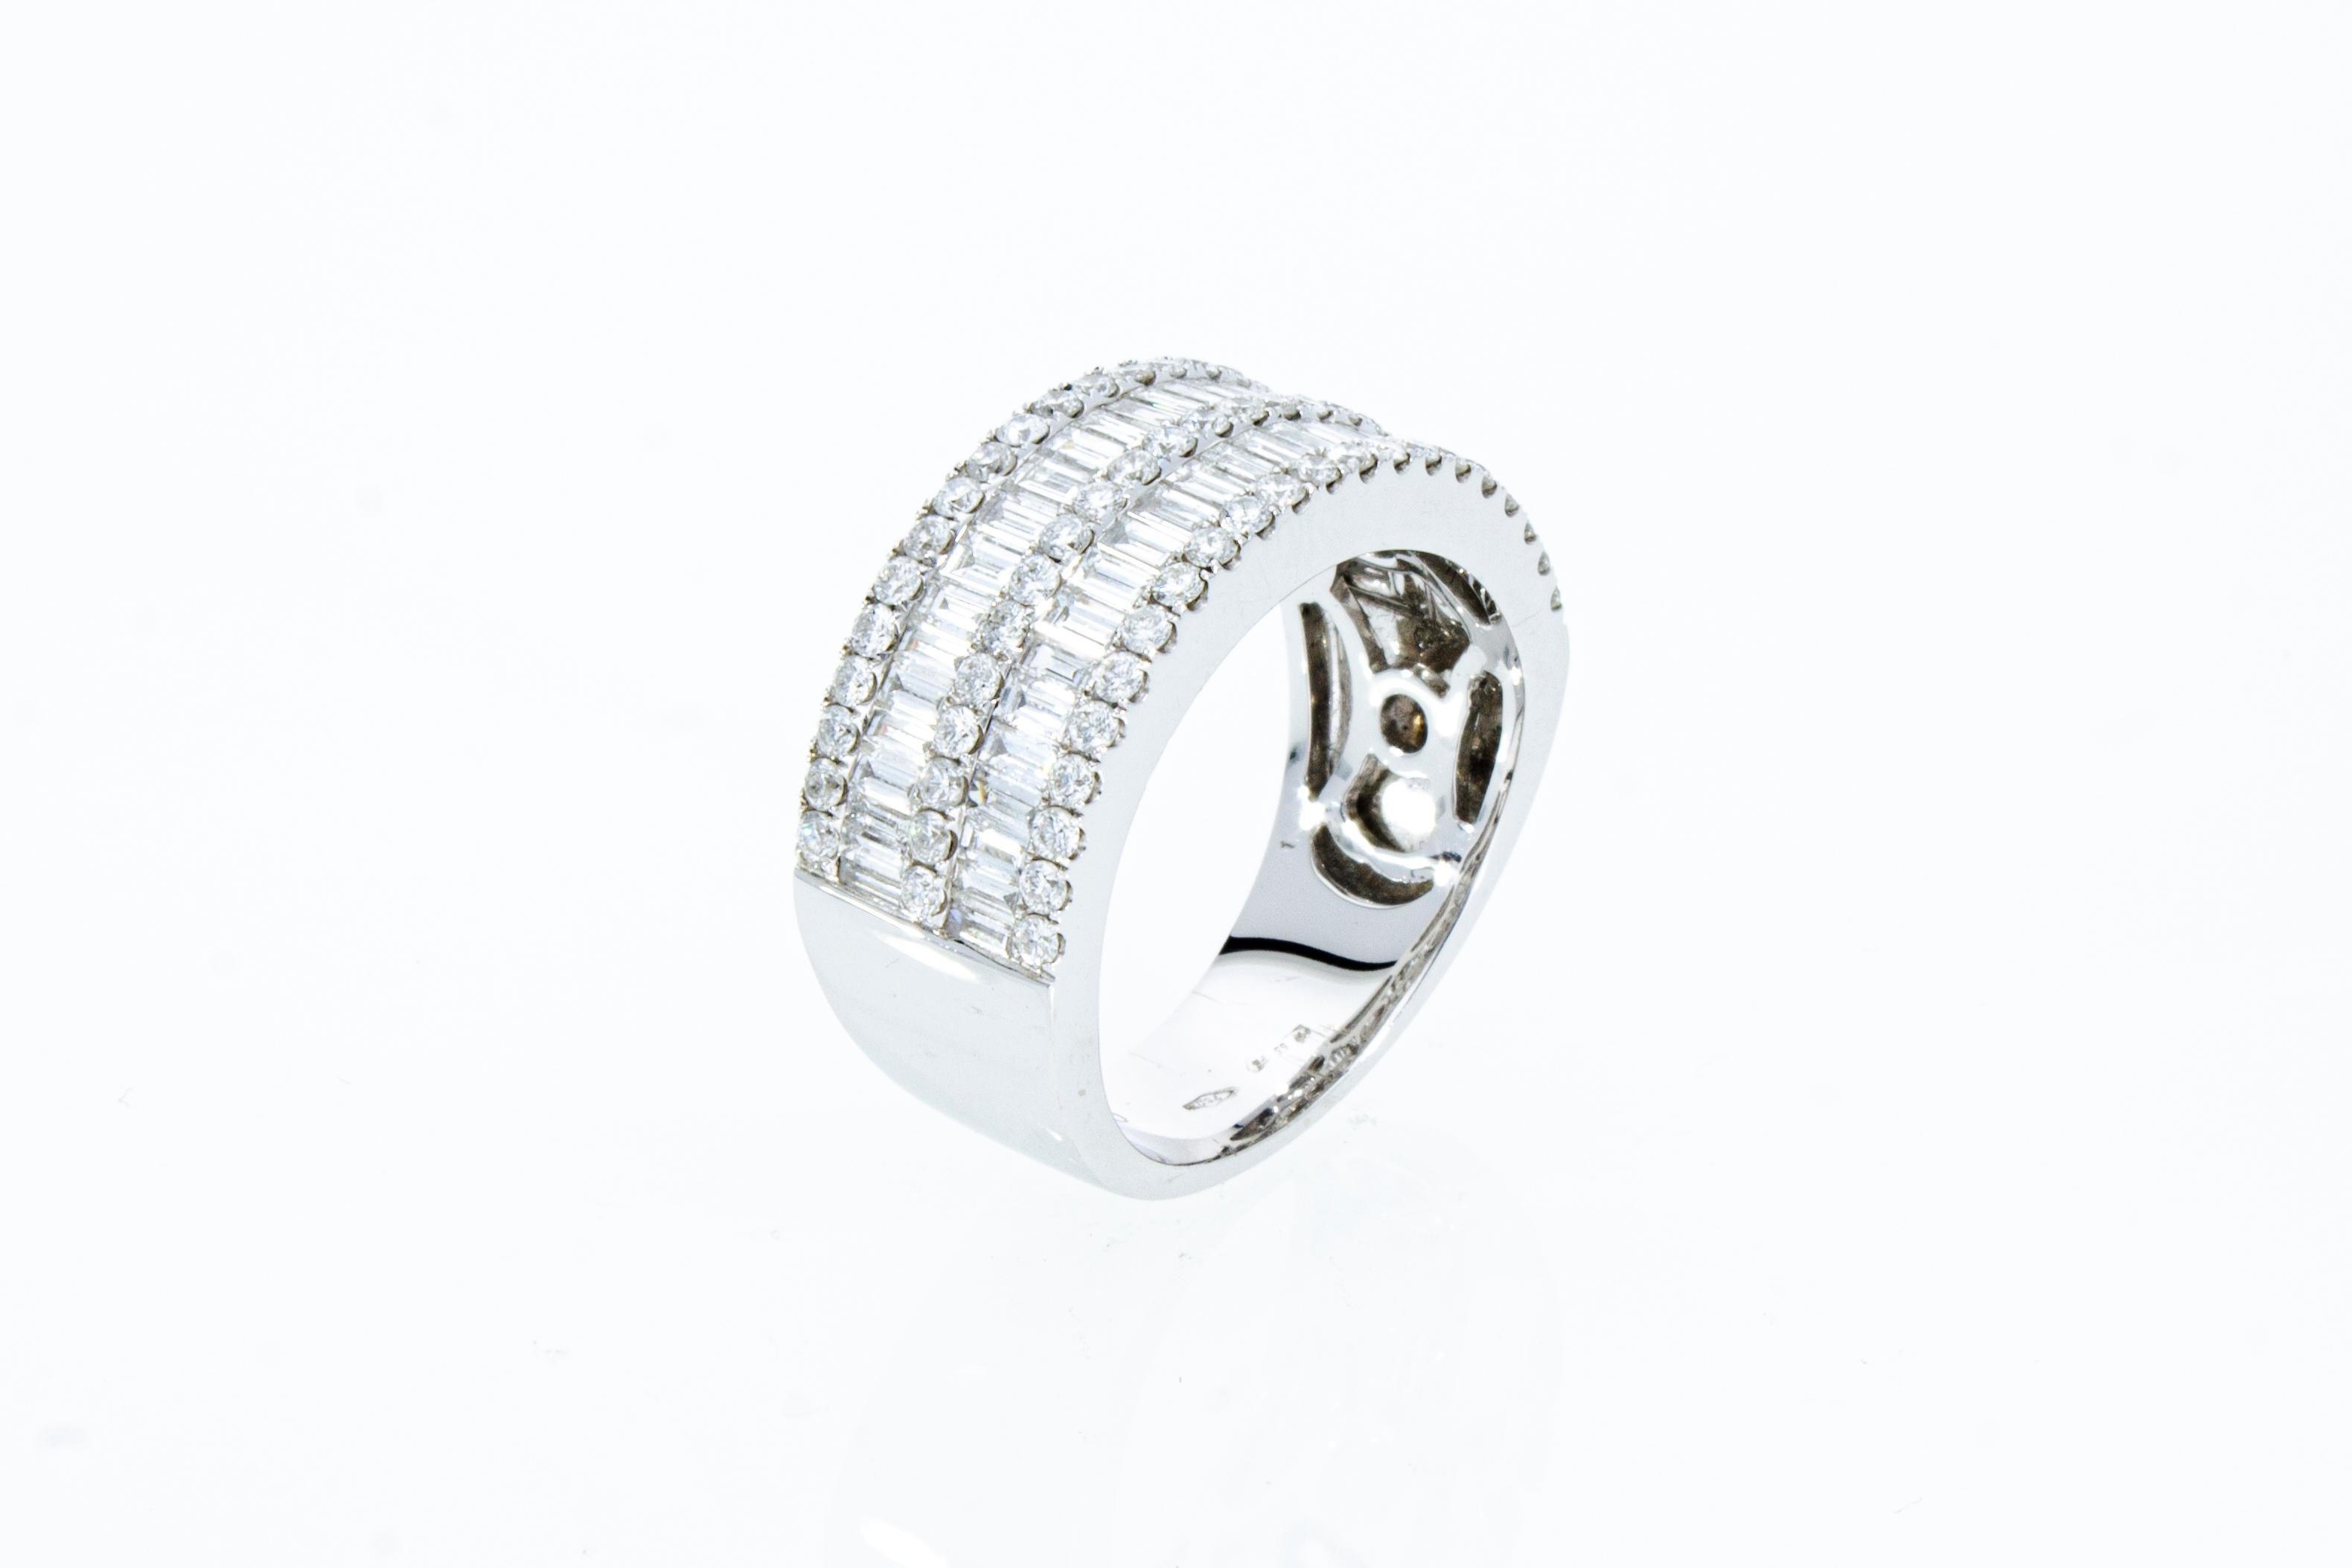 Band Ring with 2.03 Ct of Brilliant and Baguette Cut Diamonds, 18 Kt White Gold  For Sale 7